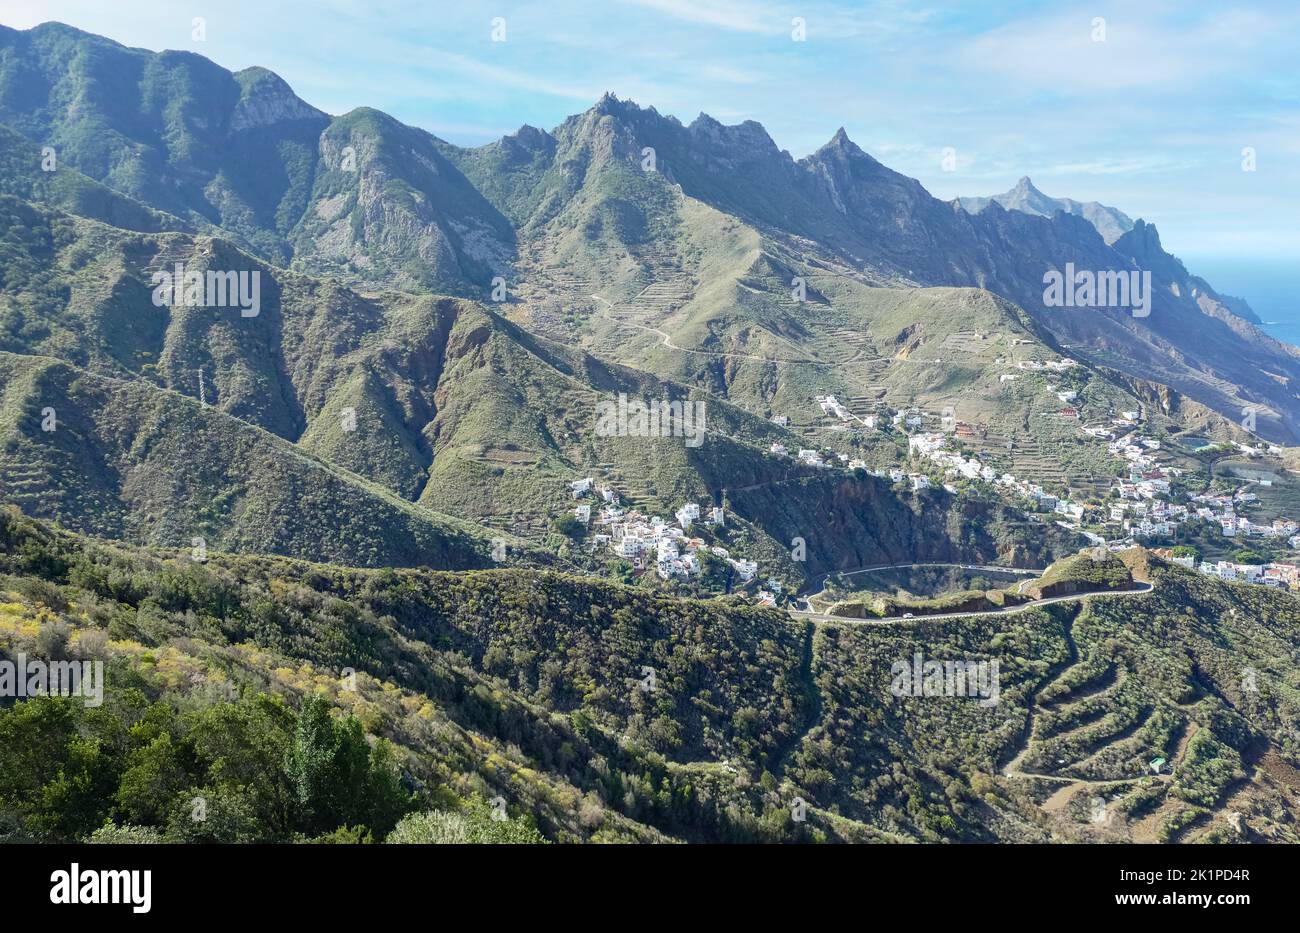 Scenery around Taganana, a town in the north of Tenerife, the largest of the Canary Islands, Spain Stock Photo